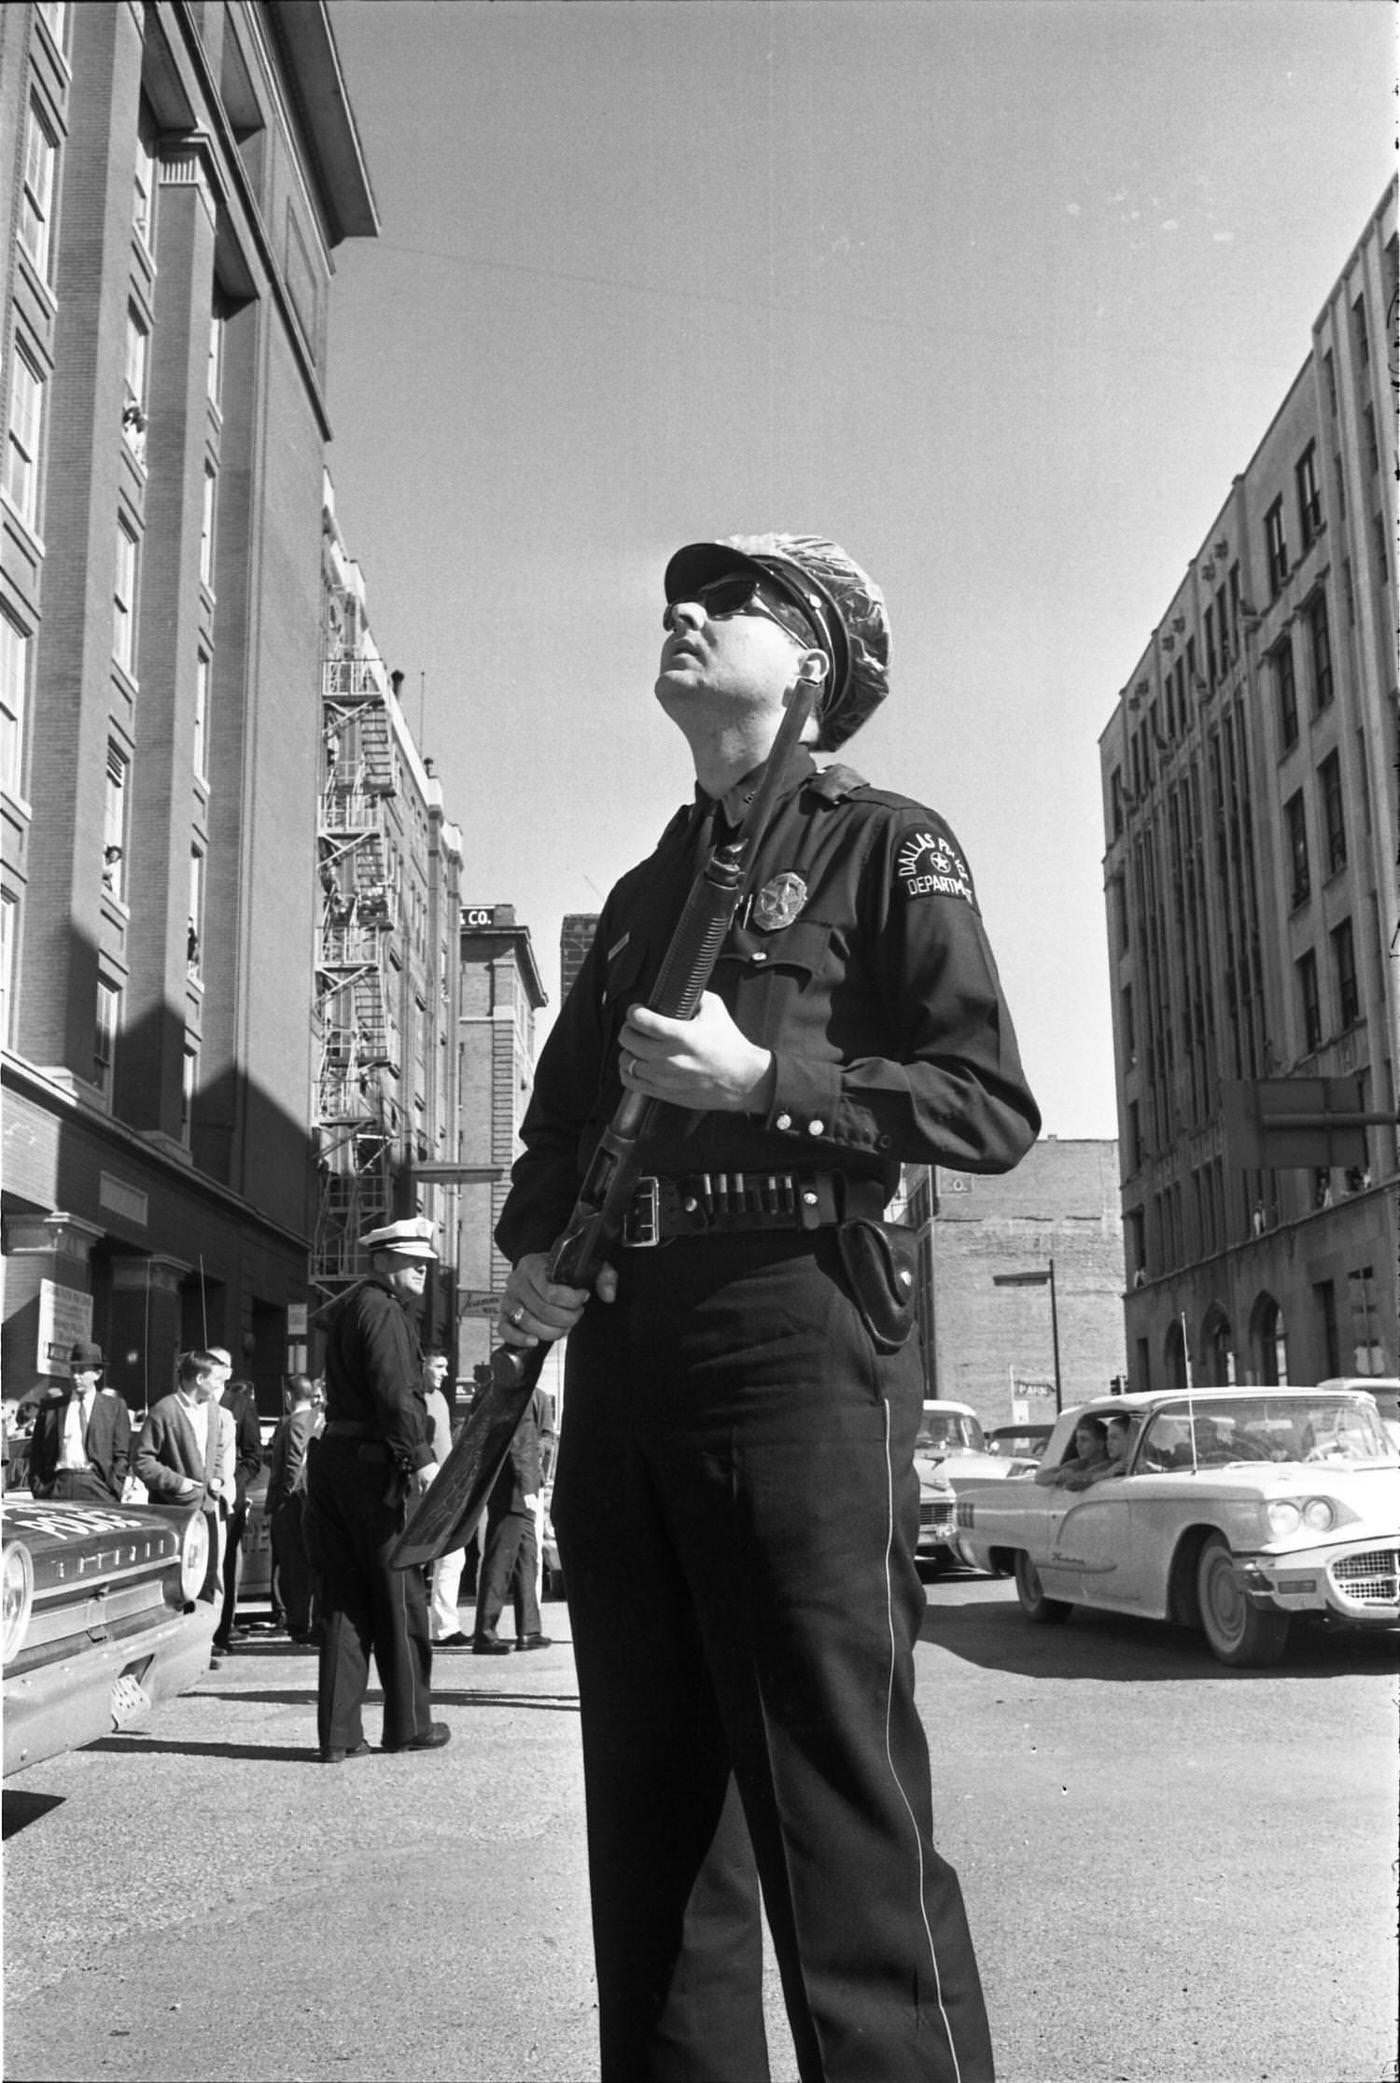 A Dallas Police officer outside the Texas School Book Depository, 1963